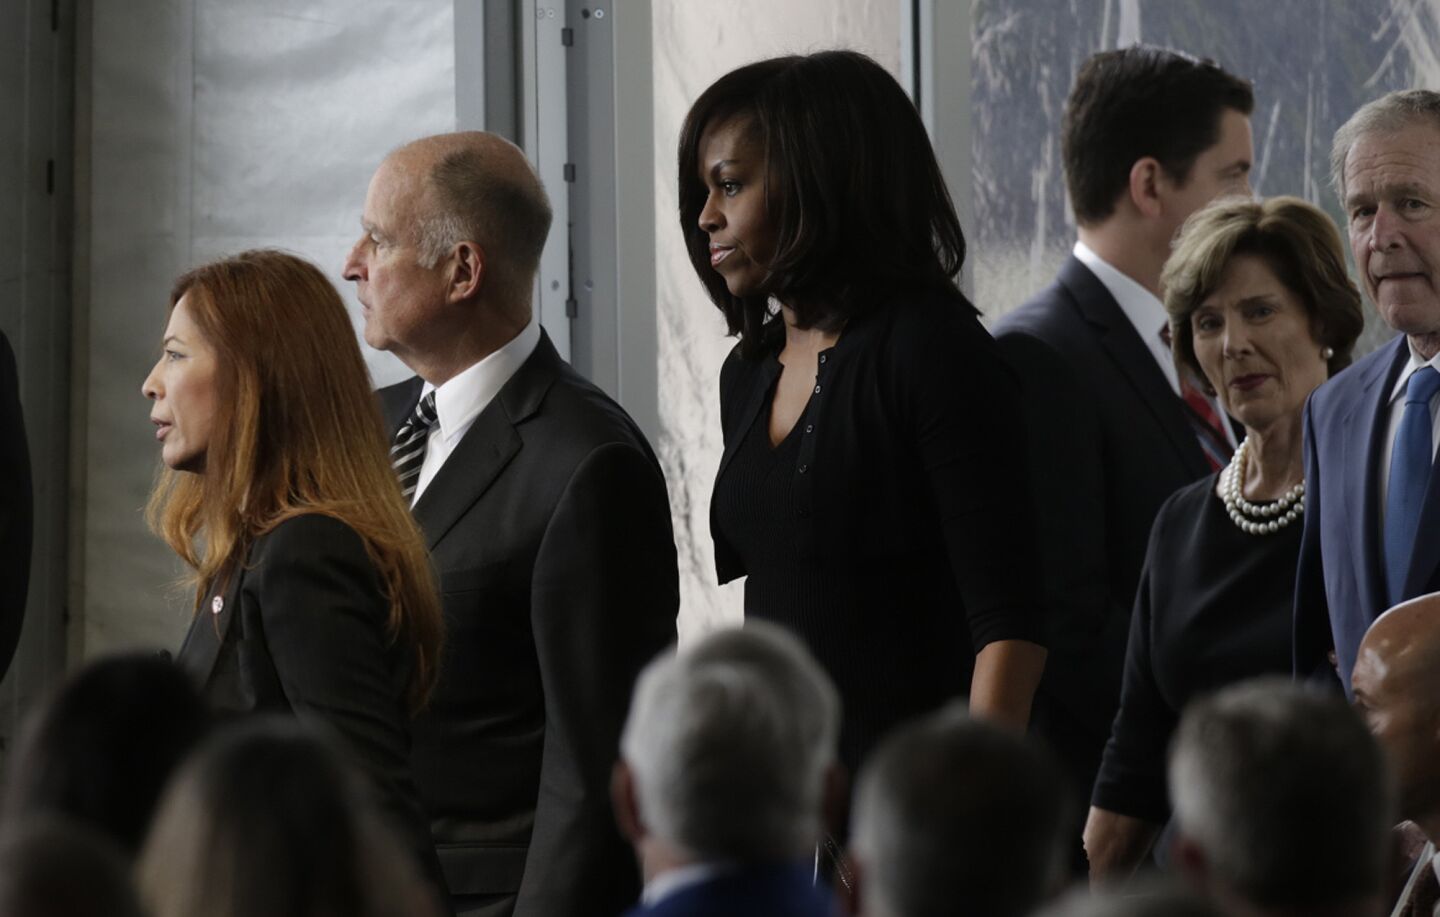 First Lady Michelle Obama, center, arrives with former President George Bush, right, and his wife, Laura Bush, second from right, and Calif. Gov. Jerry Brown, second from left, for the funeral services for former First Lady Nancy Reagan.